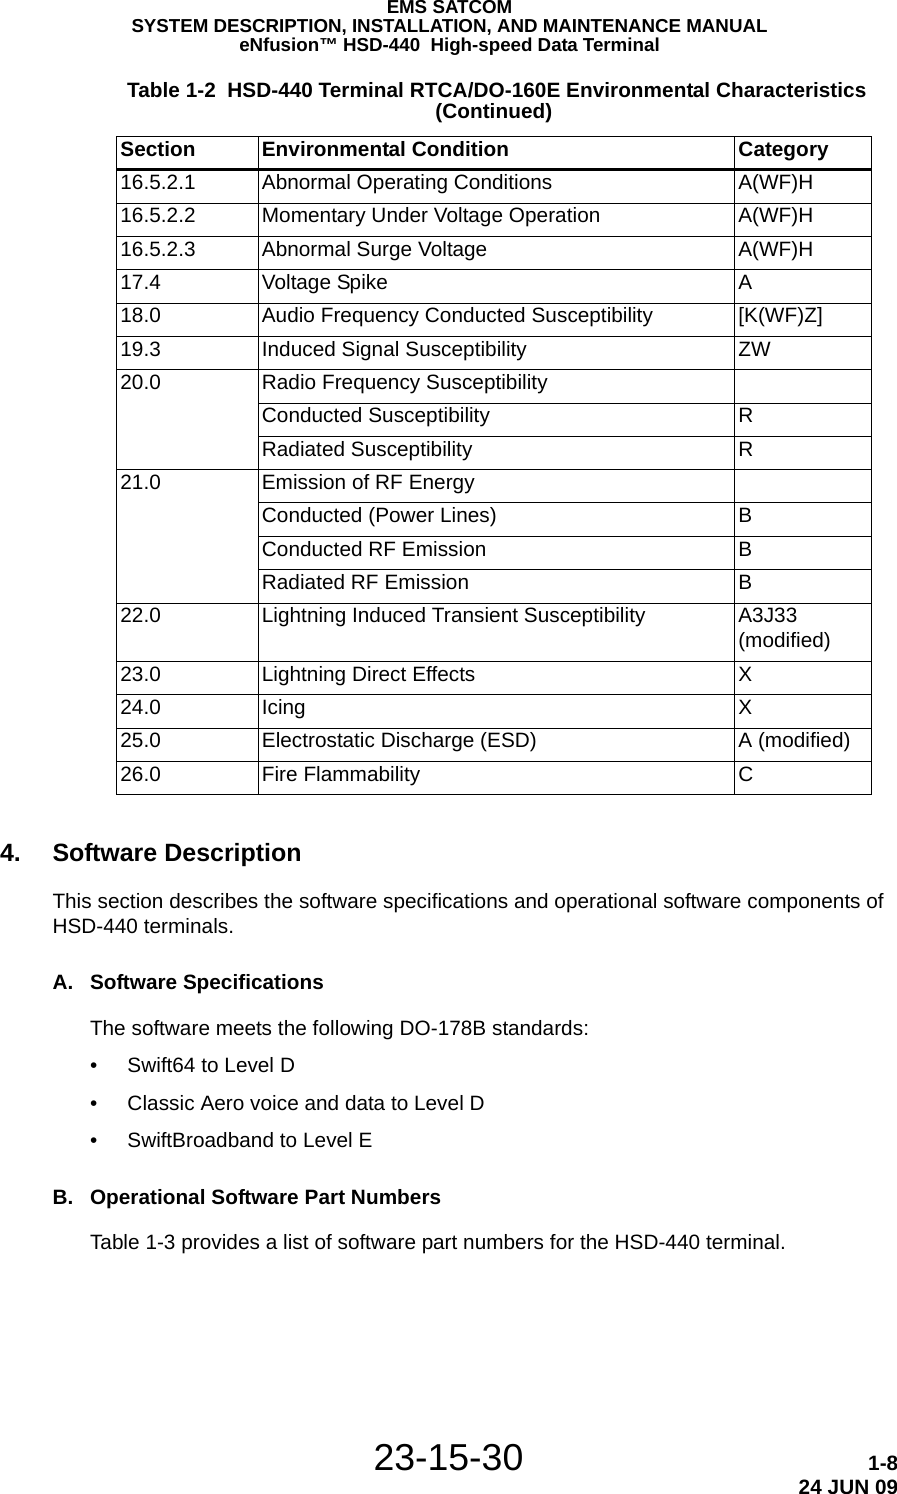 23-15-30 1-824 JUN 09EMS SATCOMSYSTEM DESCRIPTION, INSTALLATION, AND MAINTENANCE MANUALeNfusion™ HSD-440  High-speed Data Terminal4. Software DescriptionThis section describes the software specifications and operational software components of HSD-440 terminals.A. Software SpecificationsThe software meets the following DO-178B standards:• Swift64 to Level D• Classic Aero voice and data to Level D• SwiftBroadband to Level EB. Operational Software Part NumbersTable 1-3 provides a list of software part numbers for the HSD-440 terminal.16.5.2.1 Abnormal Operating Conditions A(WF)H16.5.2.2 Momentary Under Voltage Operation A(WF)H16.5.2.3 Abnormal Surge Voltage A(WF)H17.4 Voltage Spike A18.0 Audio Frequency Conducted Susceptibility [K(WF)Z]19.3 Induced Signal Susceptibility ZW20.0 Radio Frequency SusceptibilityConducted Susceptibility RRadiated Susceptibility R21.0 Emission of RF EnergyConducted (Power Lines) BConducted RF Emission BRadiated RF Emission B22.0 Lightning Induced Transient Susceptibility A3J33 (modified)23.0 Lightning Direct Effects X24.0 Icing X25.0 Electrostatic Discharge (ESD) A (modified)26.0 Fire Flammability C Table 1-2  HSD-440 Terminal RTCA/DO-160E Environmental Characteristics (Continued) Section Environmental Condition Category